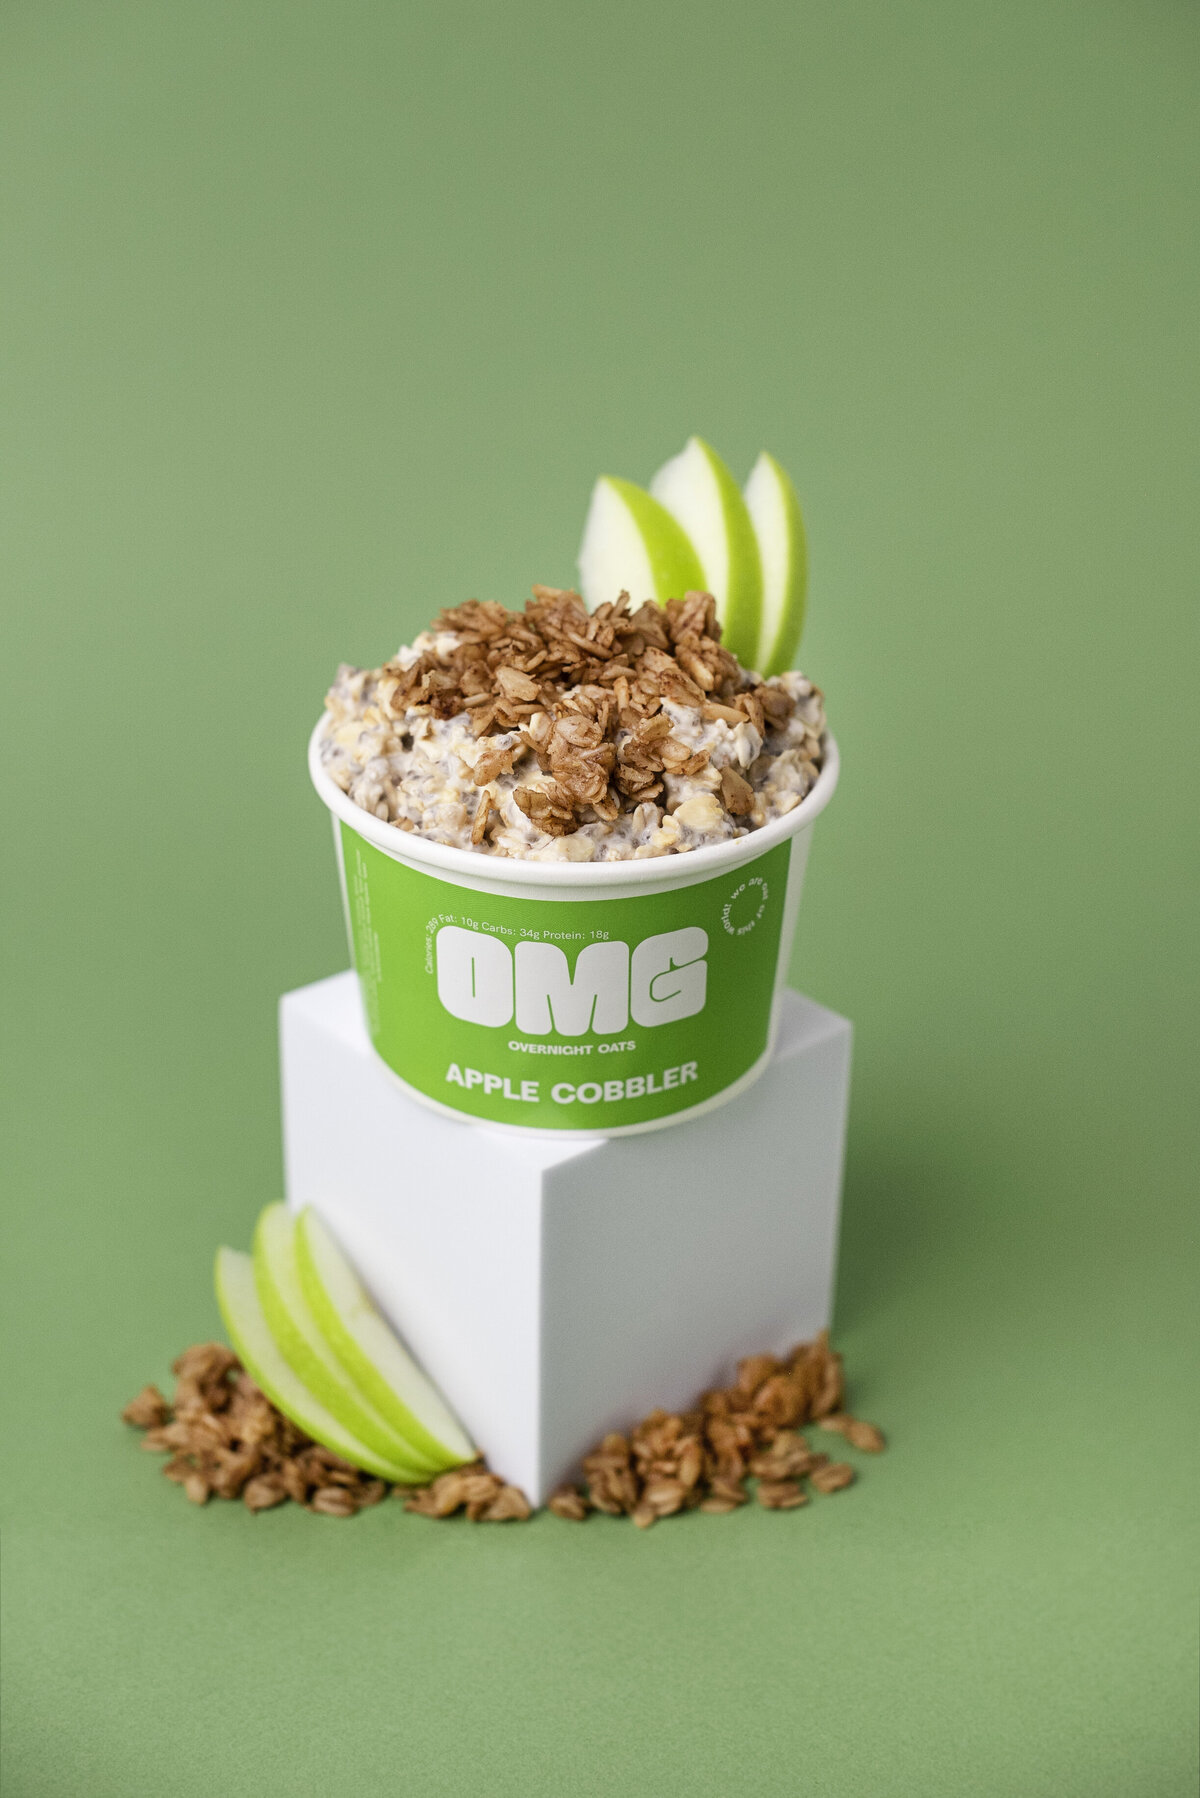 Green apple Cobbler over night oats topped with oats and green apple carton sting on white block